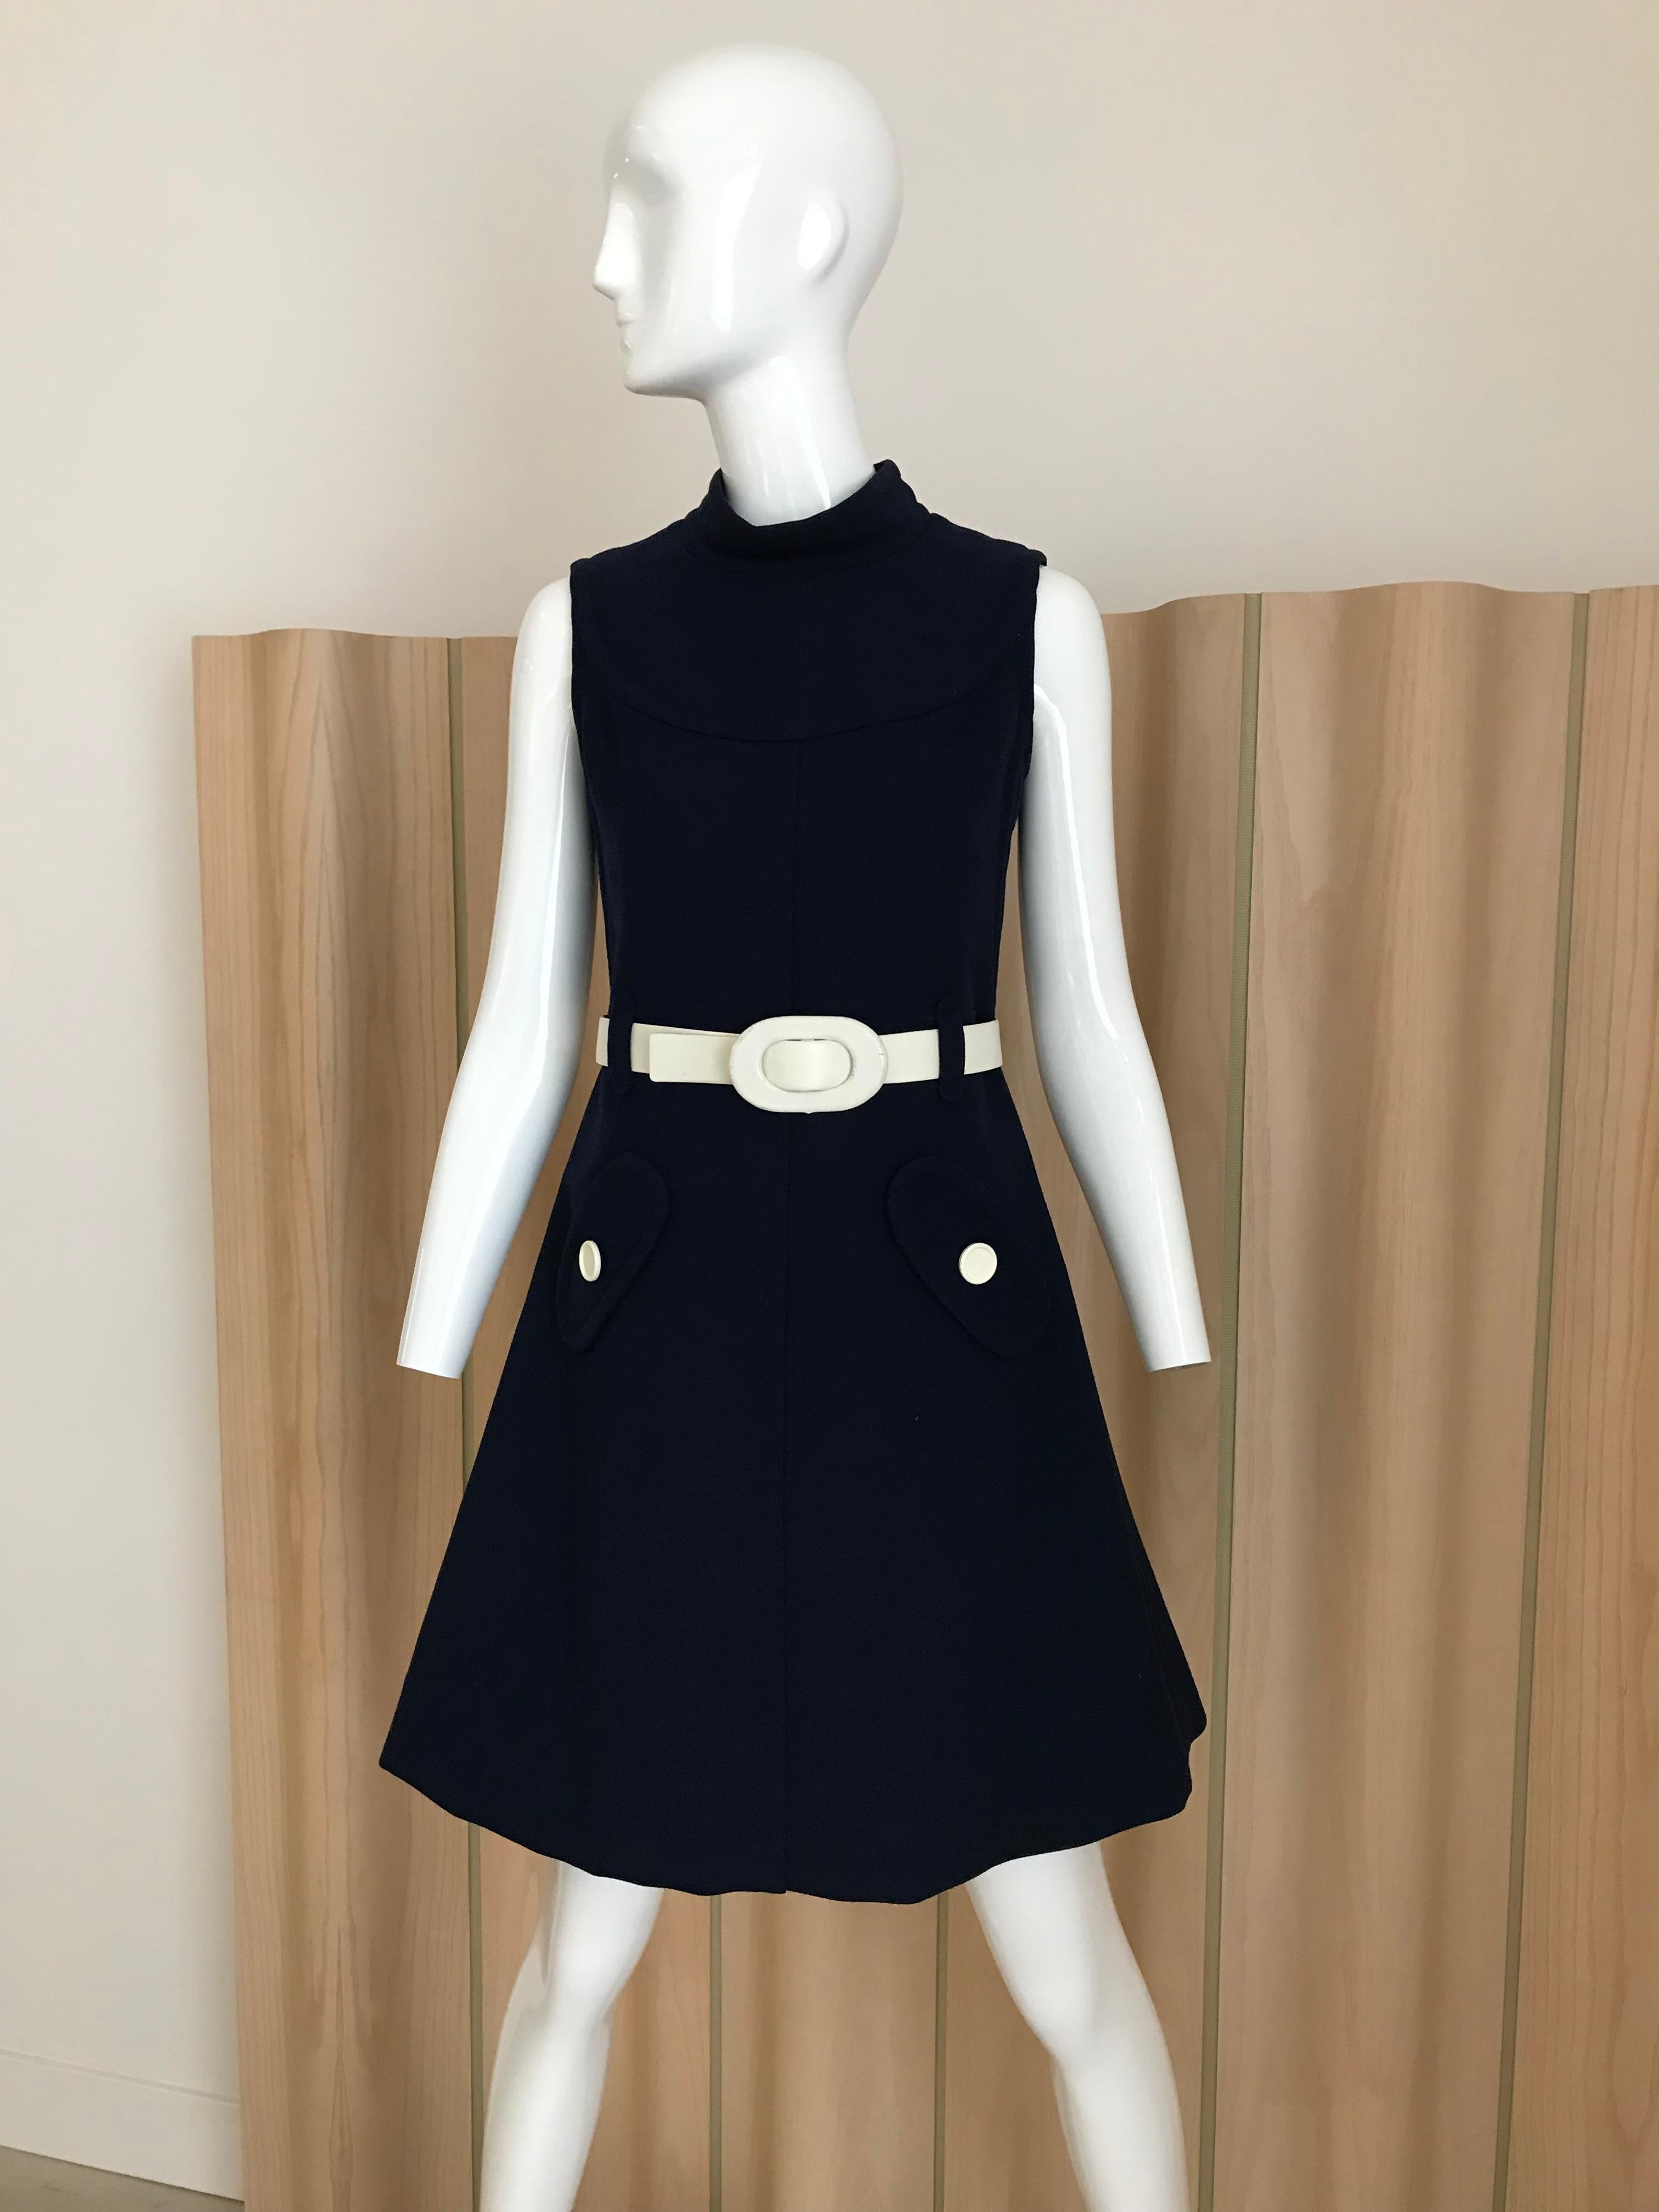 Classic Vintage Courreges 1960s Navy blue shift dress with white belt and faux pockets.
Dress is fully lined. Size : Small 
Measurement: Bust : 35” / Waist : 29” / Hip: 34”/ Dress Length 34” / seam allowance on the hem 2.5 inches

Note : there is a